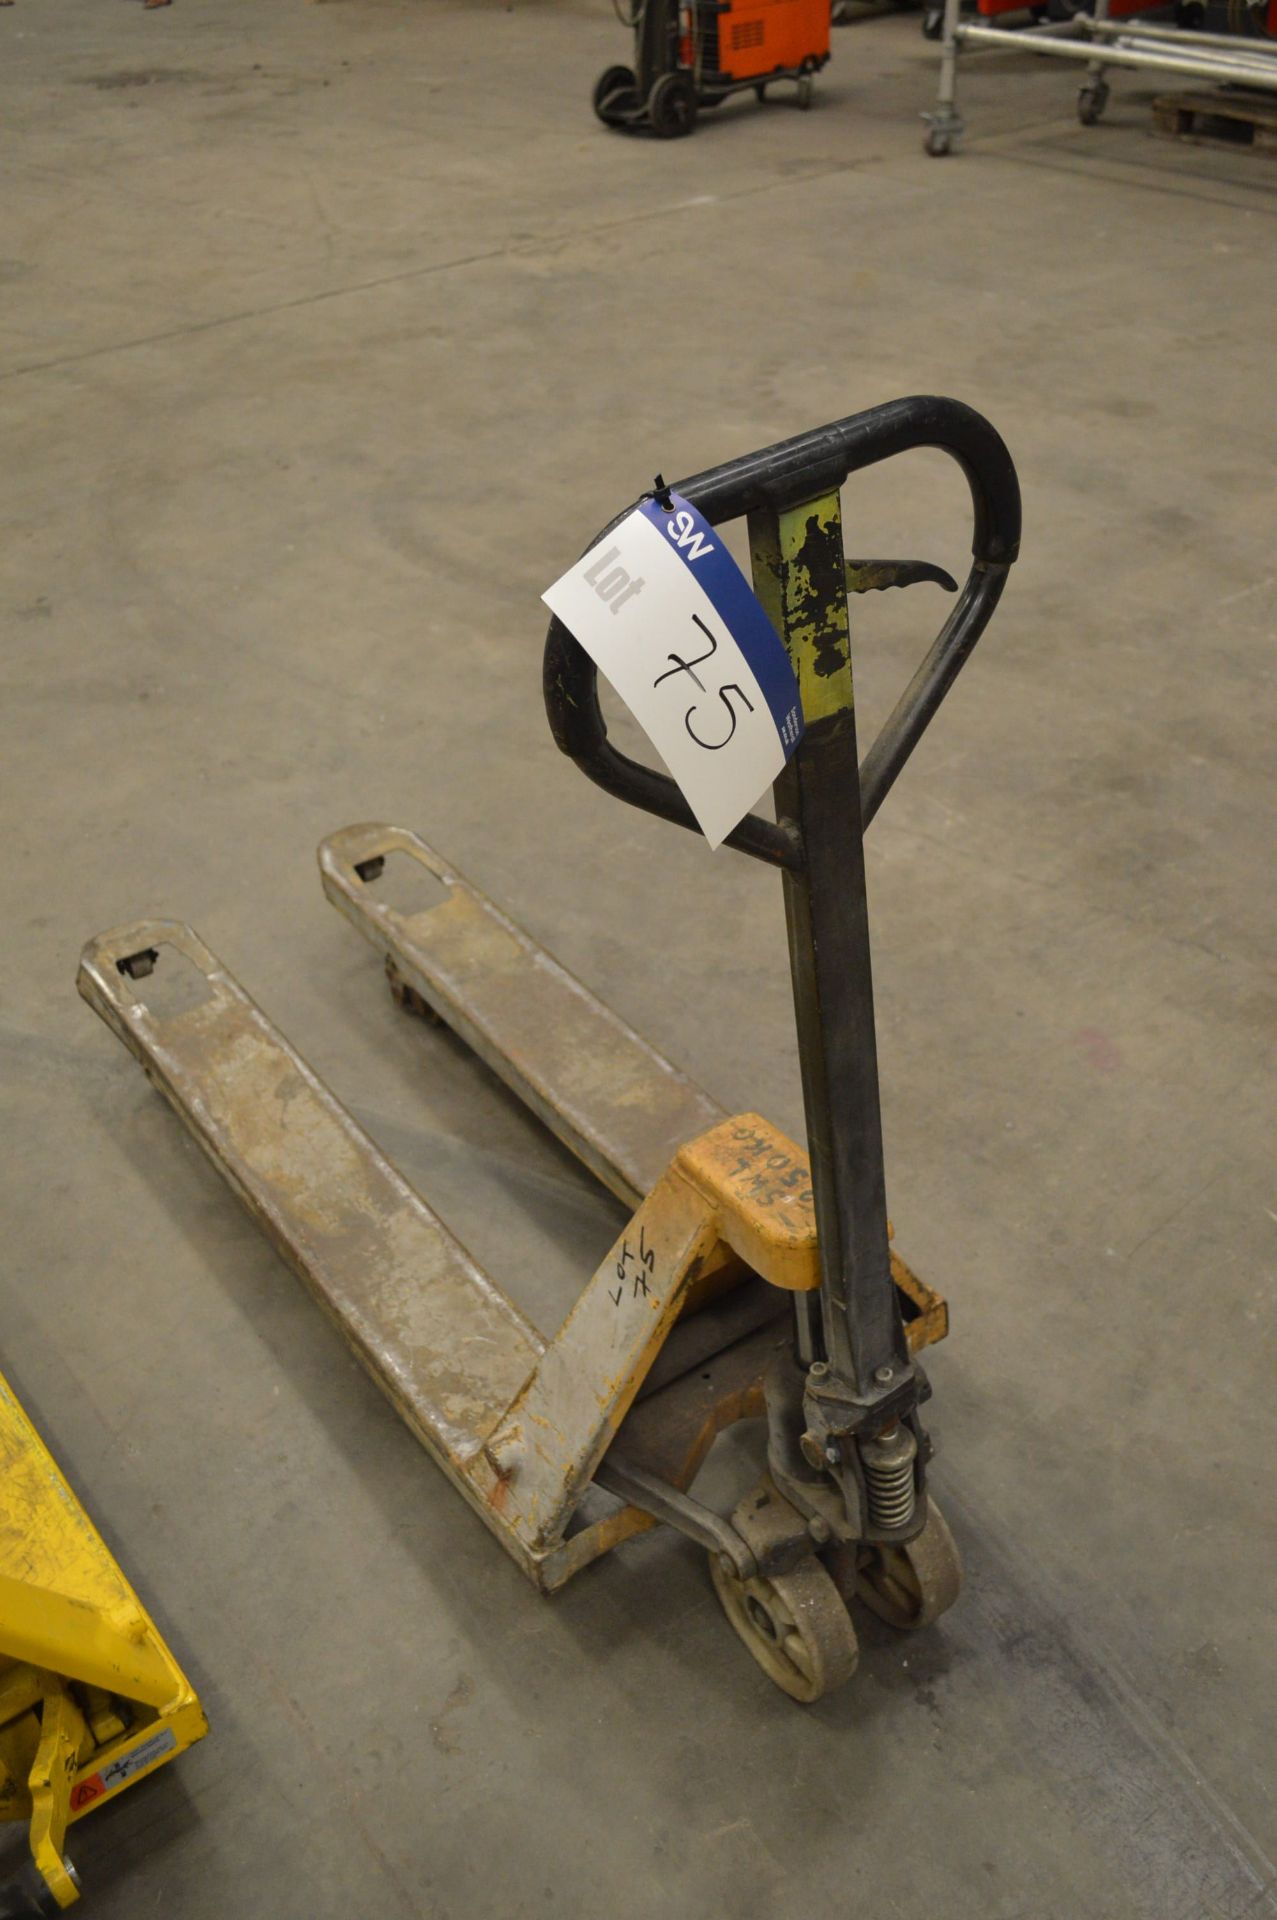 250kg Hand Hydraulic Pallet Truck, with forks 1.15m x 540mm